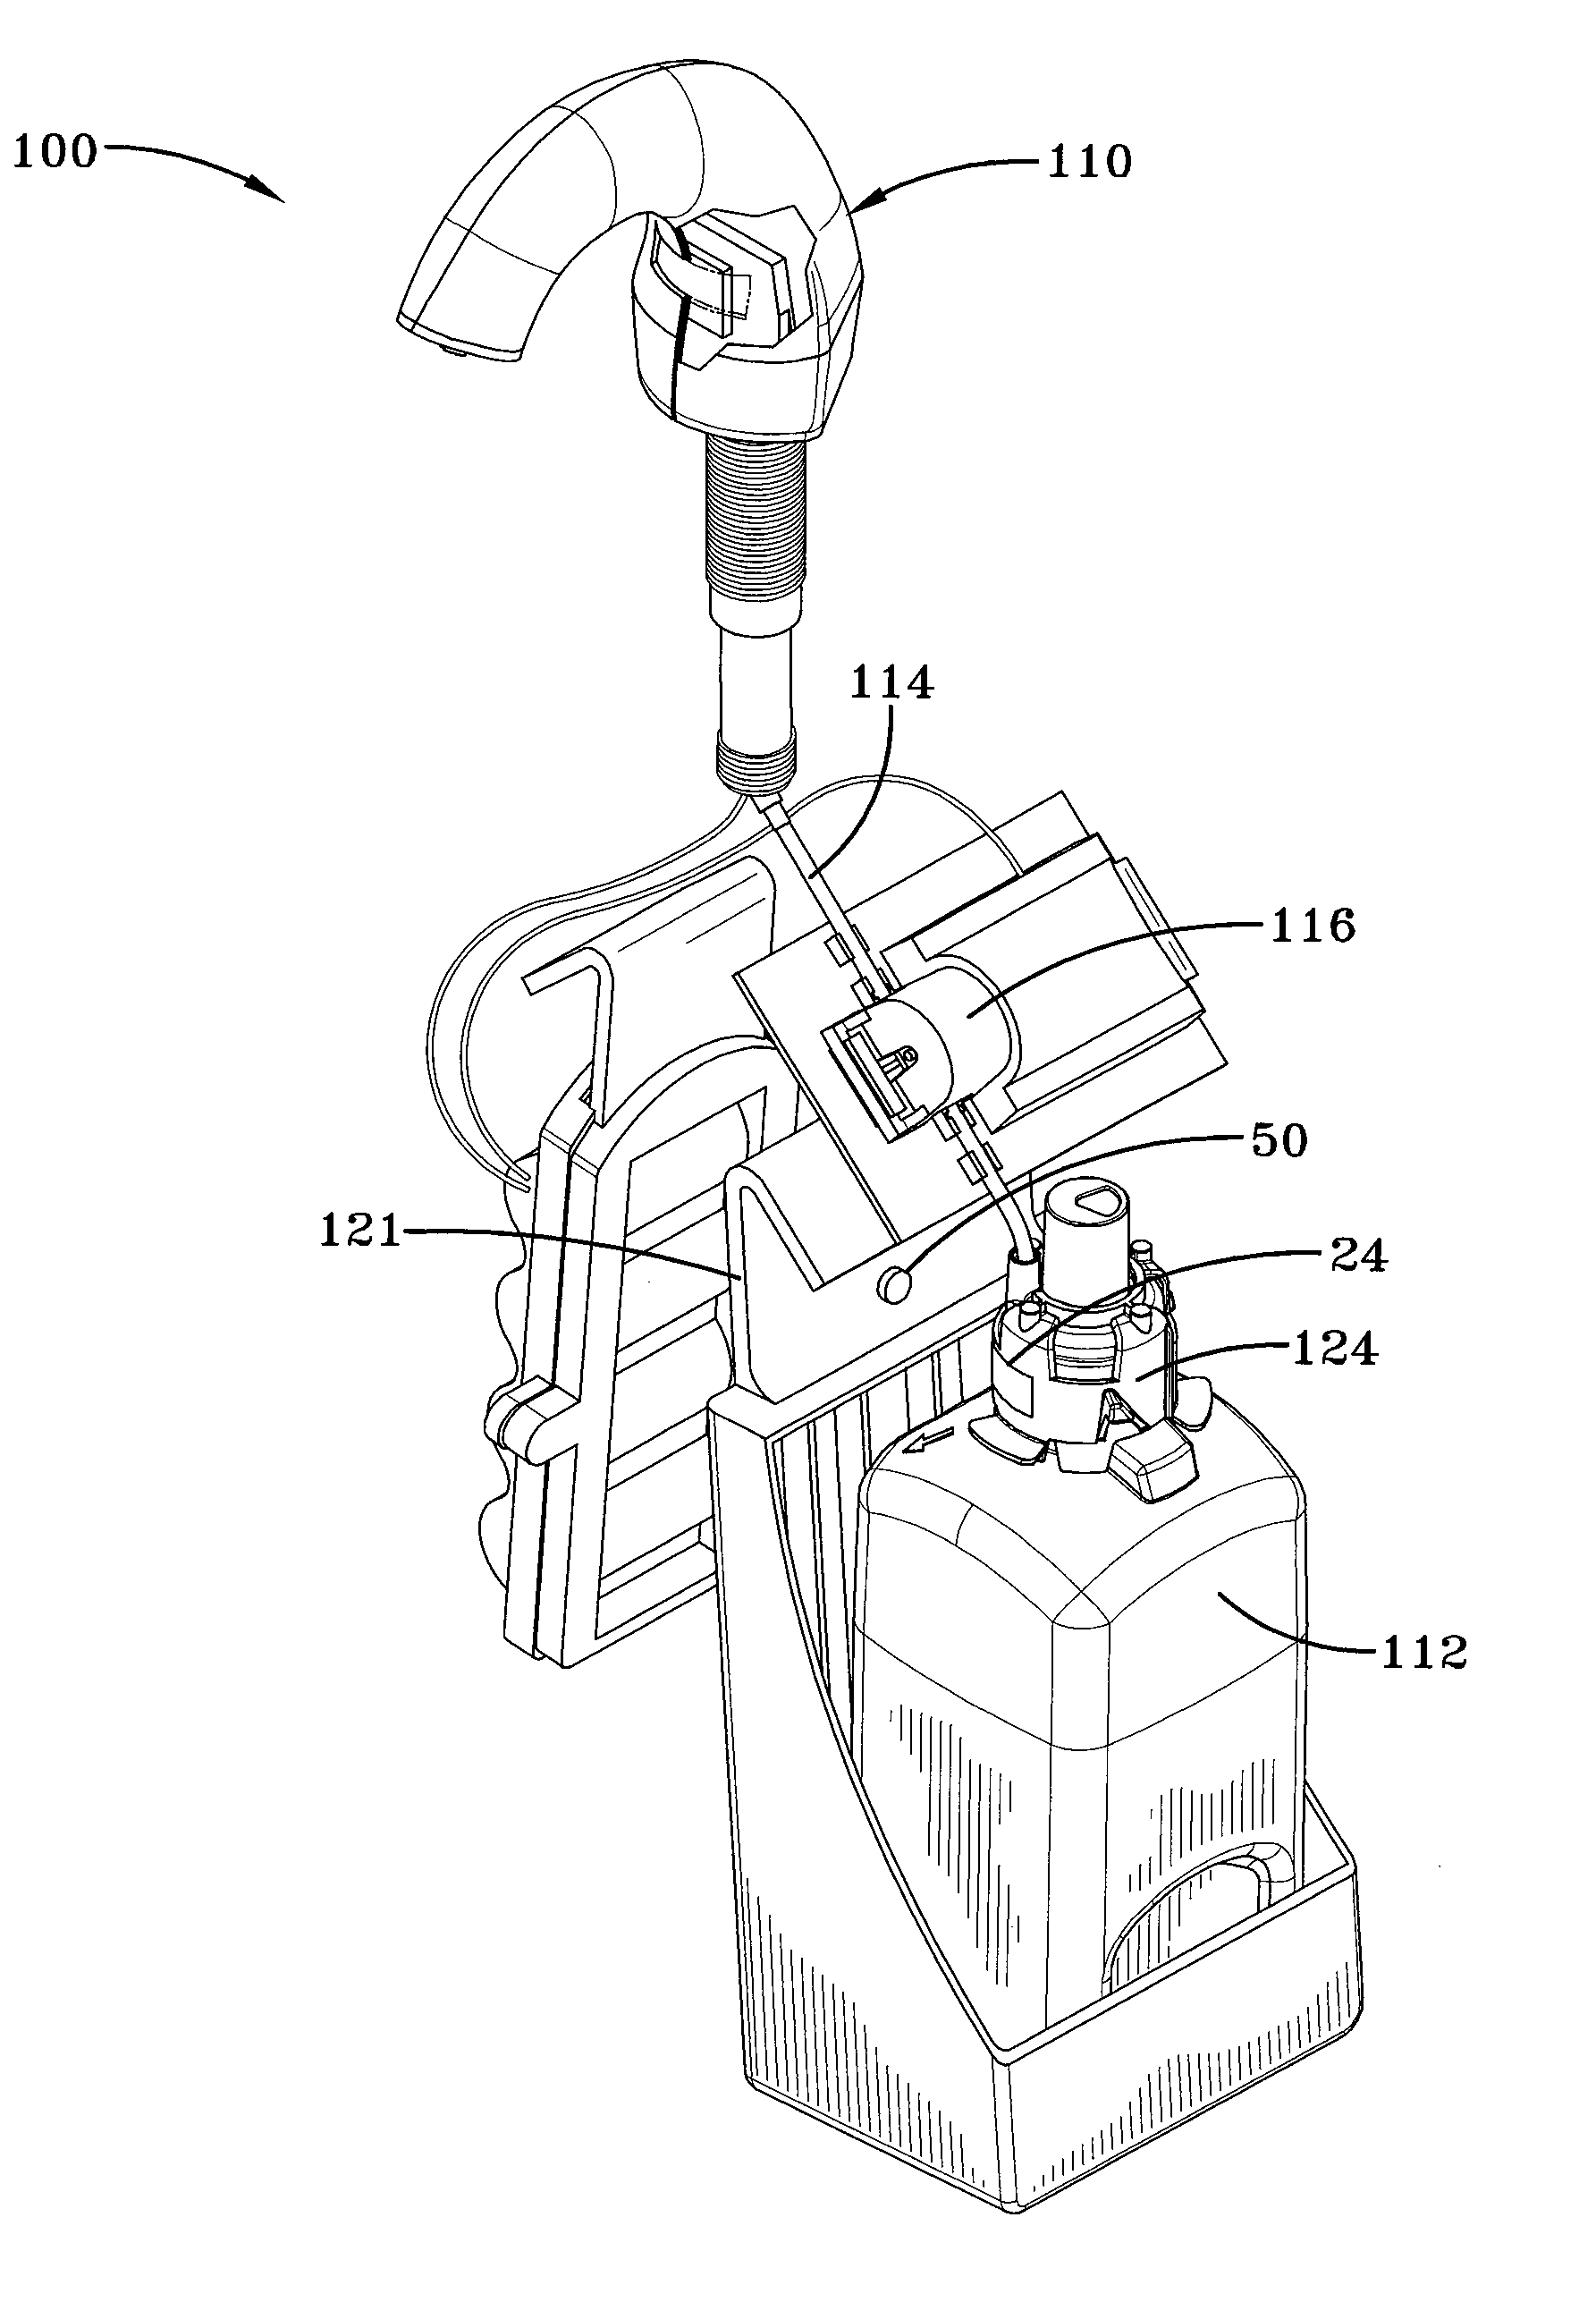 Dispenser with optical keying system